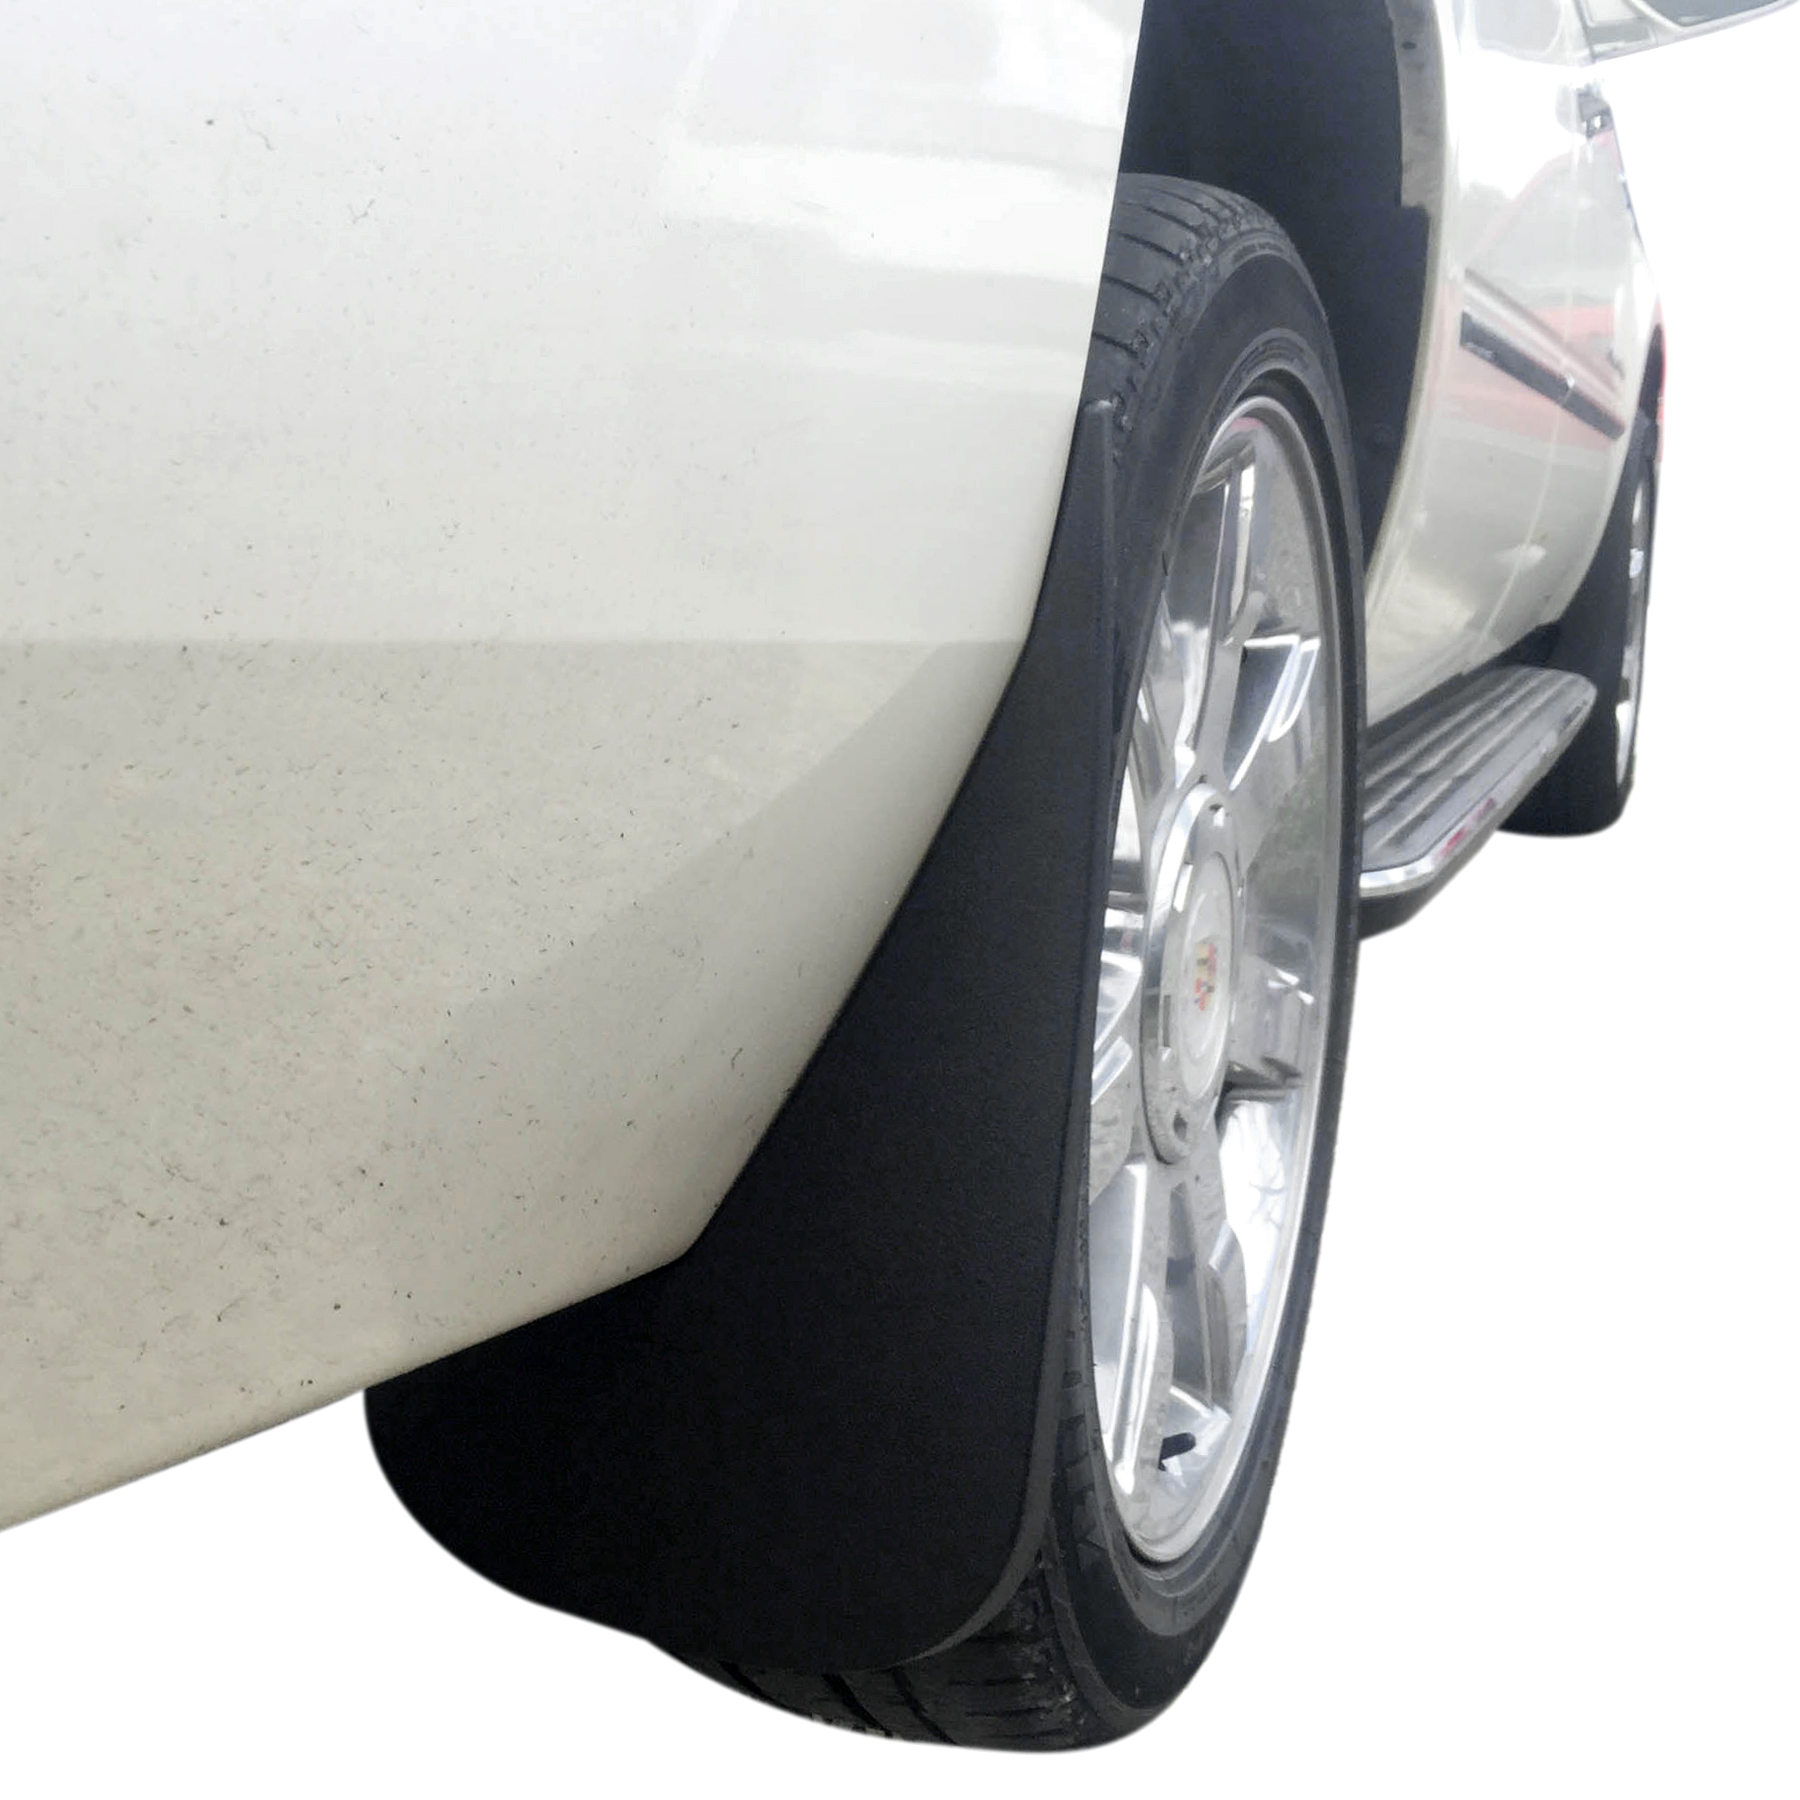 Premium Heavy Duty Molded Compatible with Only 07-14 Escalade 09-14 Tahoe (LTZ Model Only, excludes Z71 Package) Mud Flaps Guards Splash No Flares Front Rear 4pc Set 19212787 19212797 19212811 - image 3 of 7